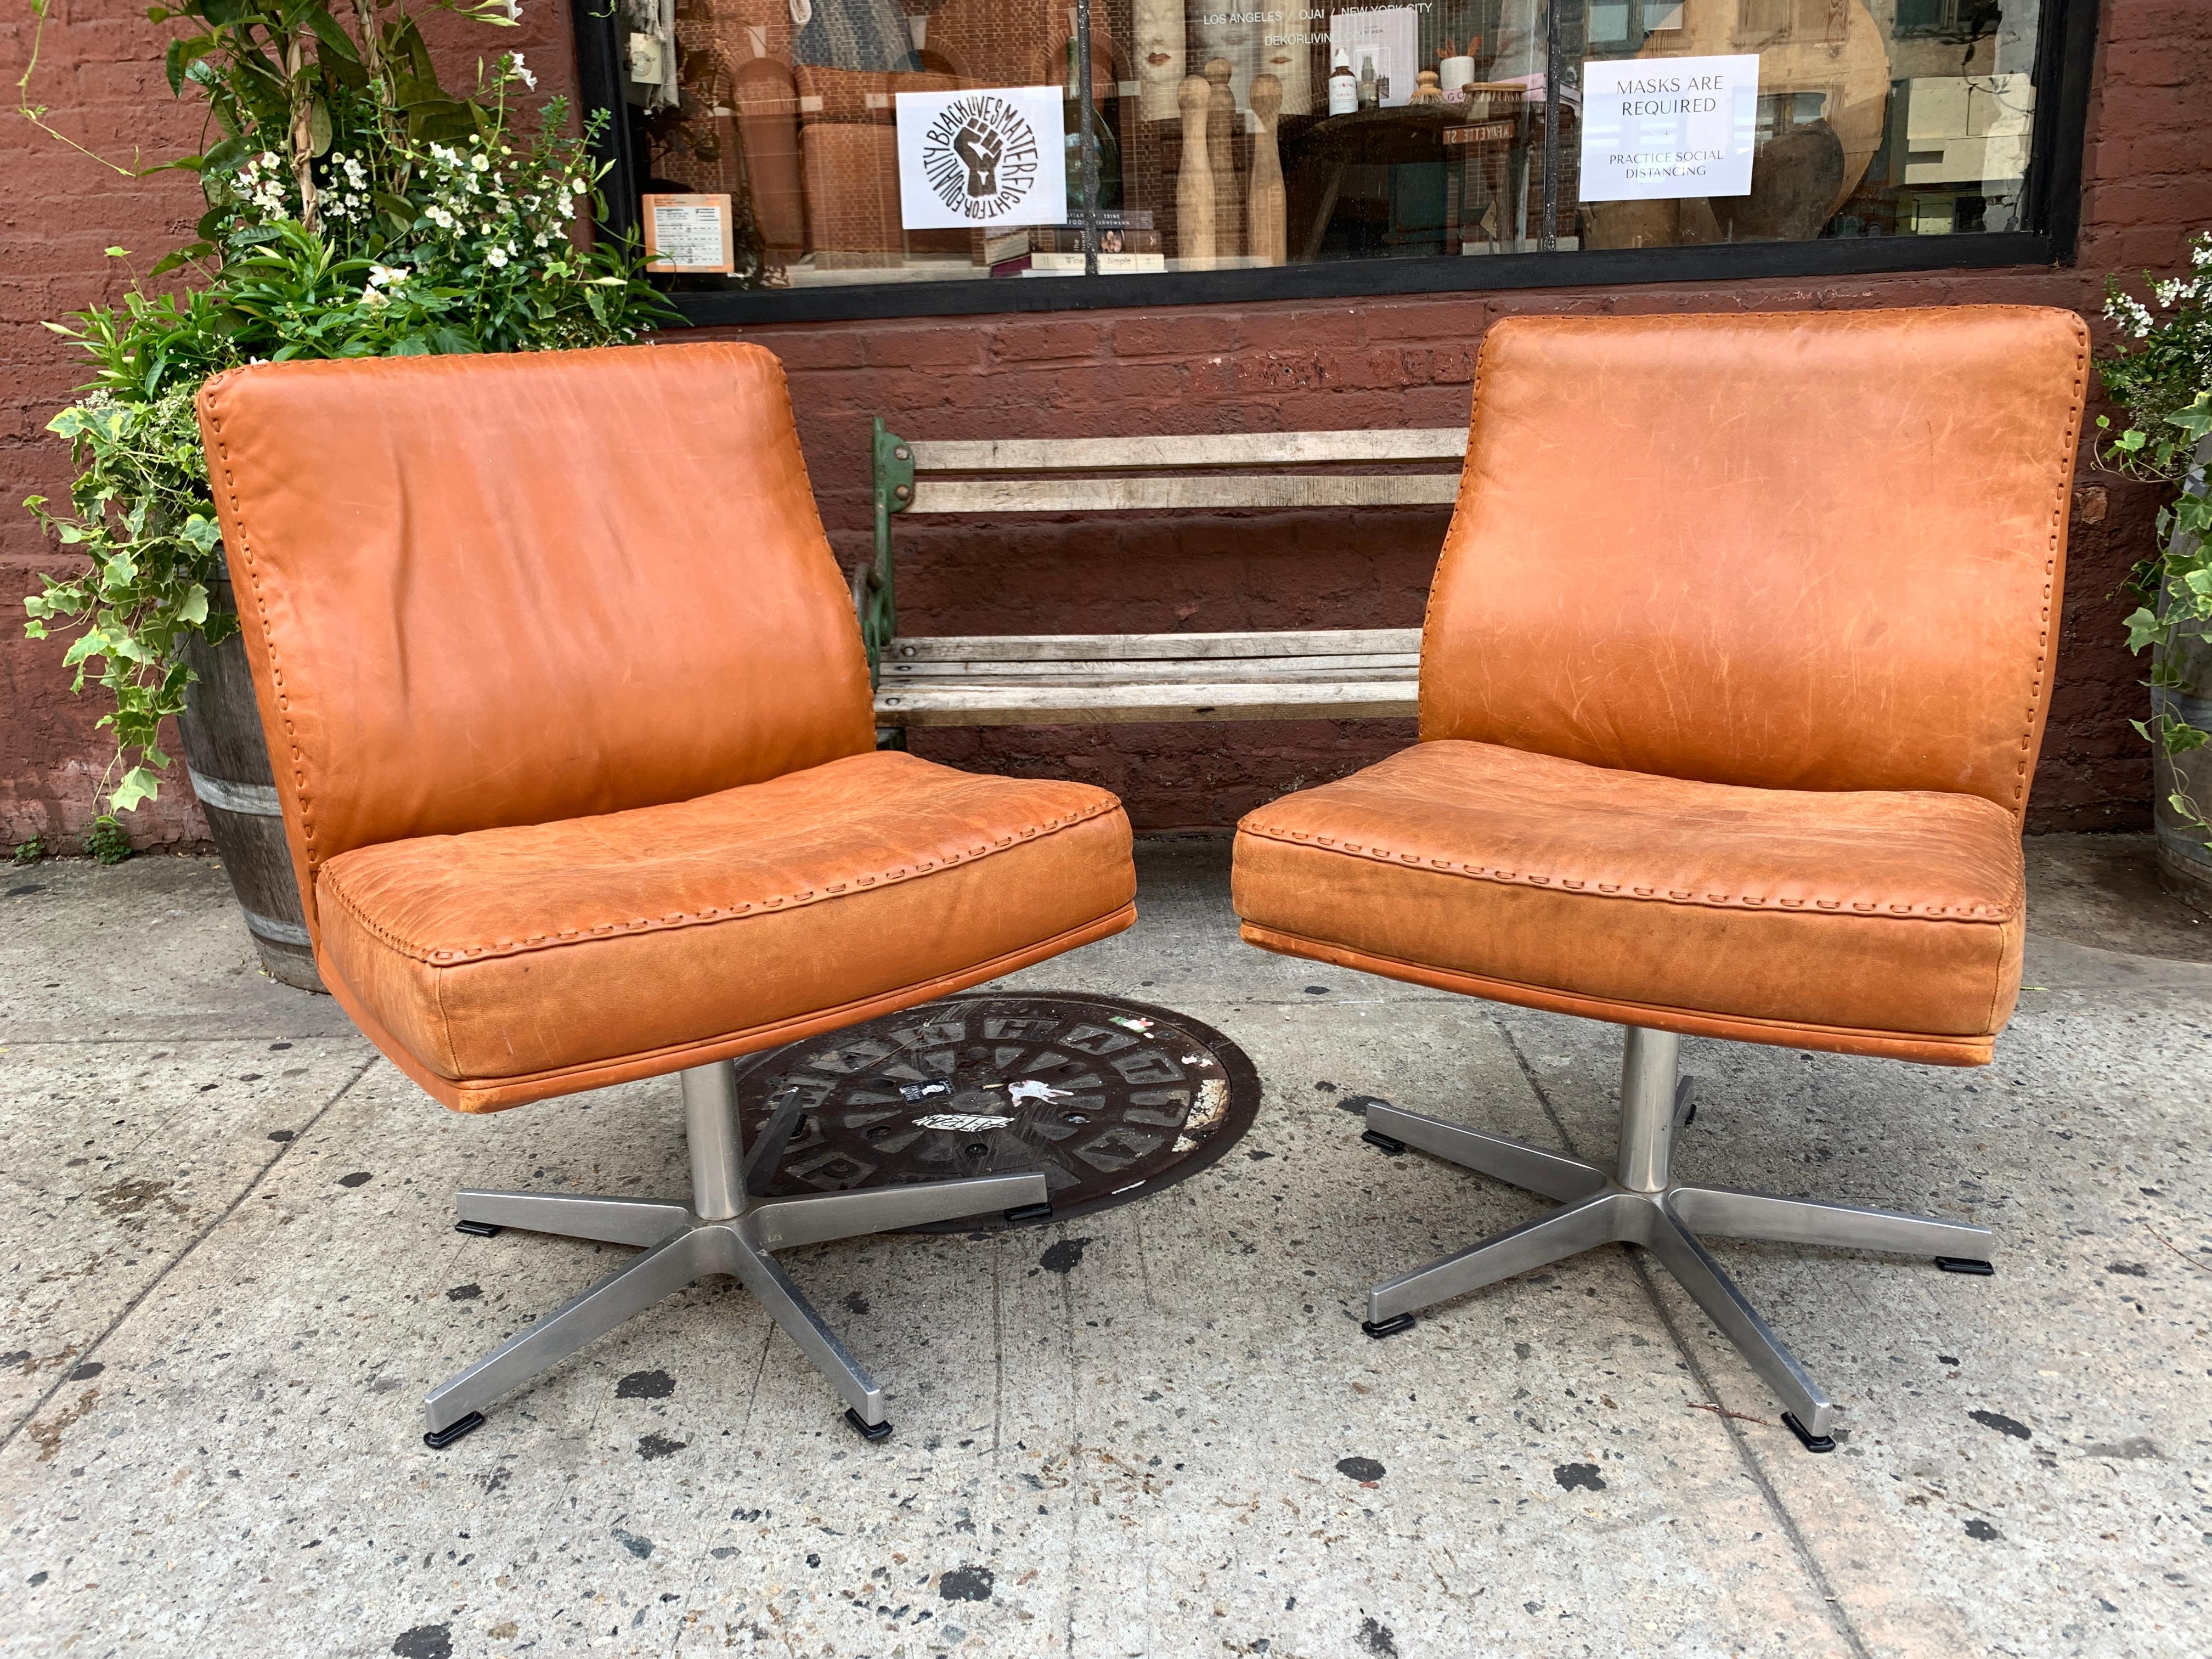 Imagine club chair but in a modern swivel office chair. This duo of vintage leather office chairs is upholstered with a warm and Classic weathered tan color with threaded leather seam.